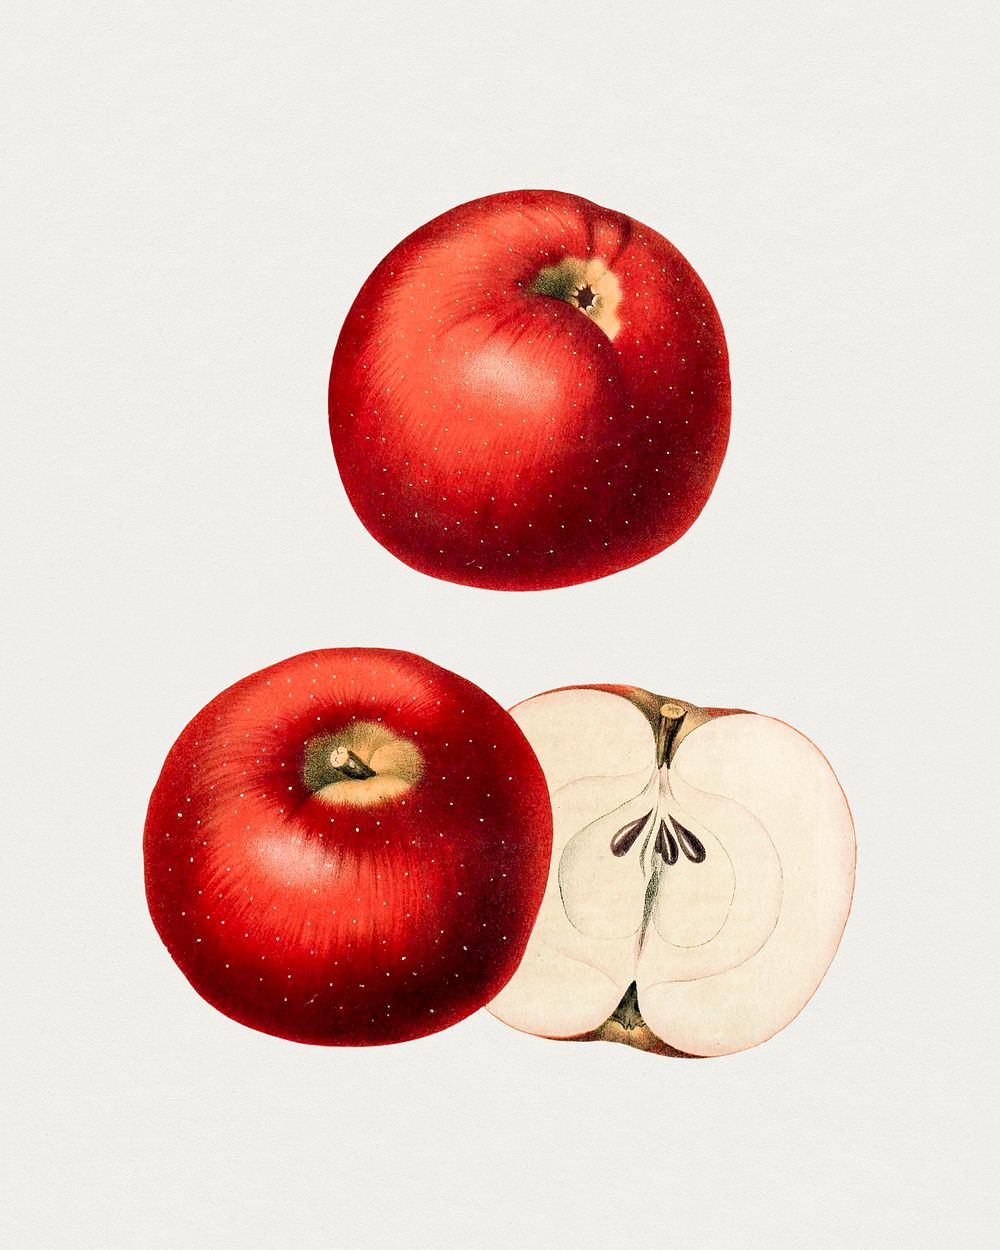 Vintage red apples. Original from Biodiversity Heritage Library. Digitally enhanced by rawpixel.